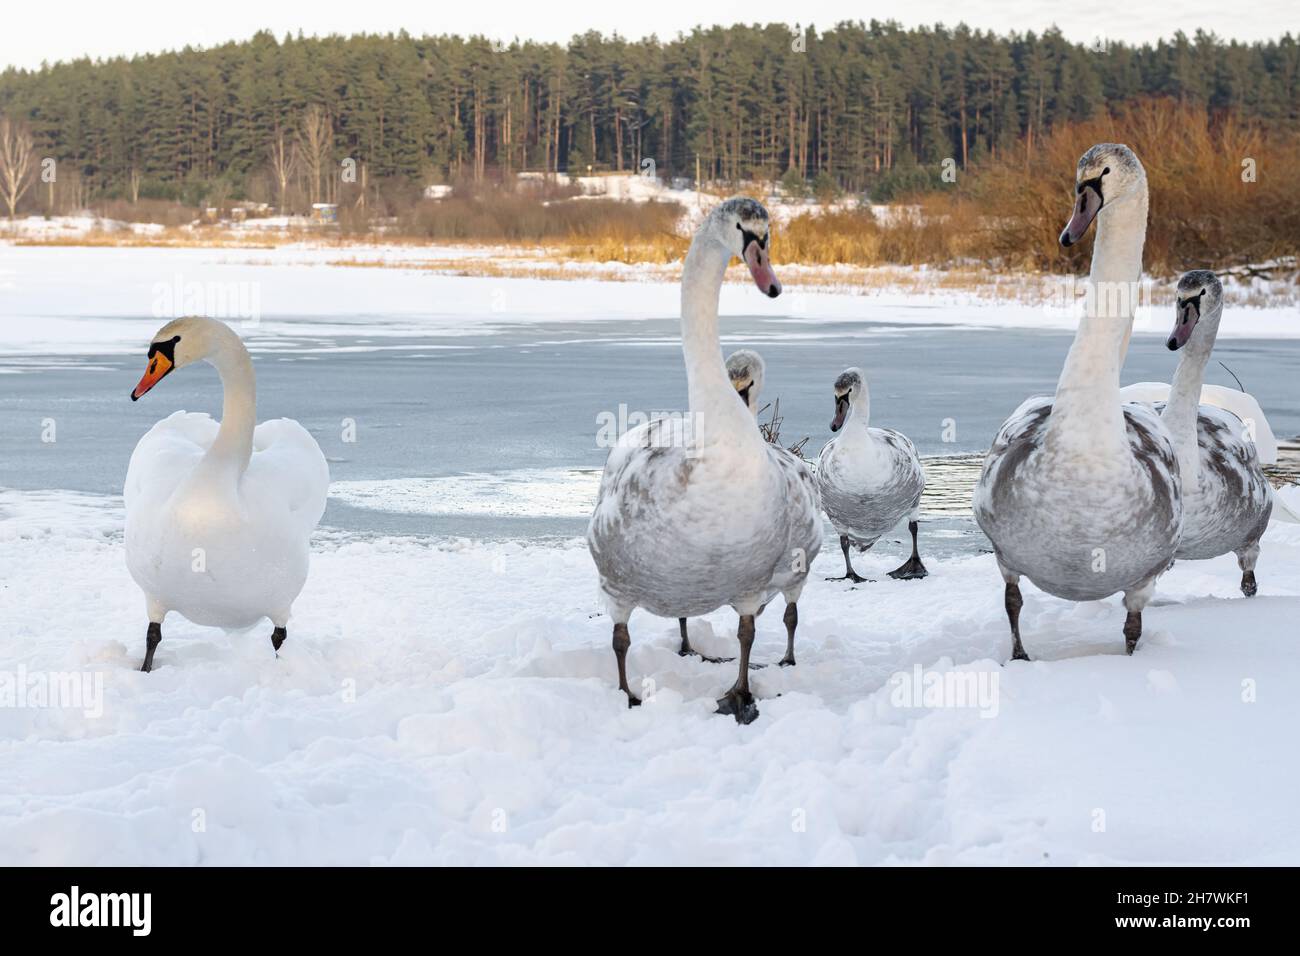 A family of swans on the shore of a frozen lake. Swans in winter. Stock Photo